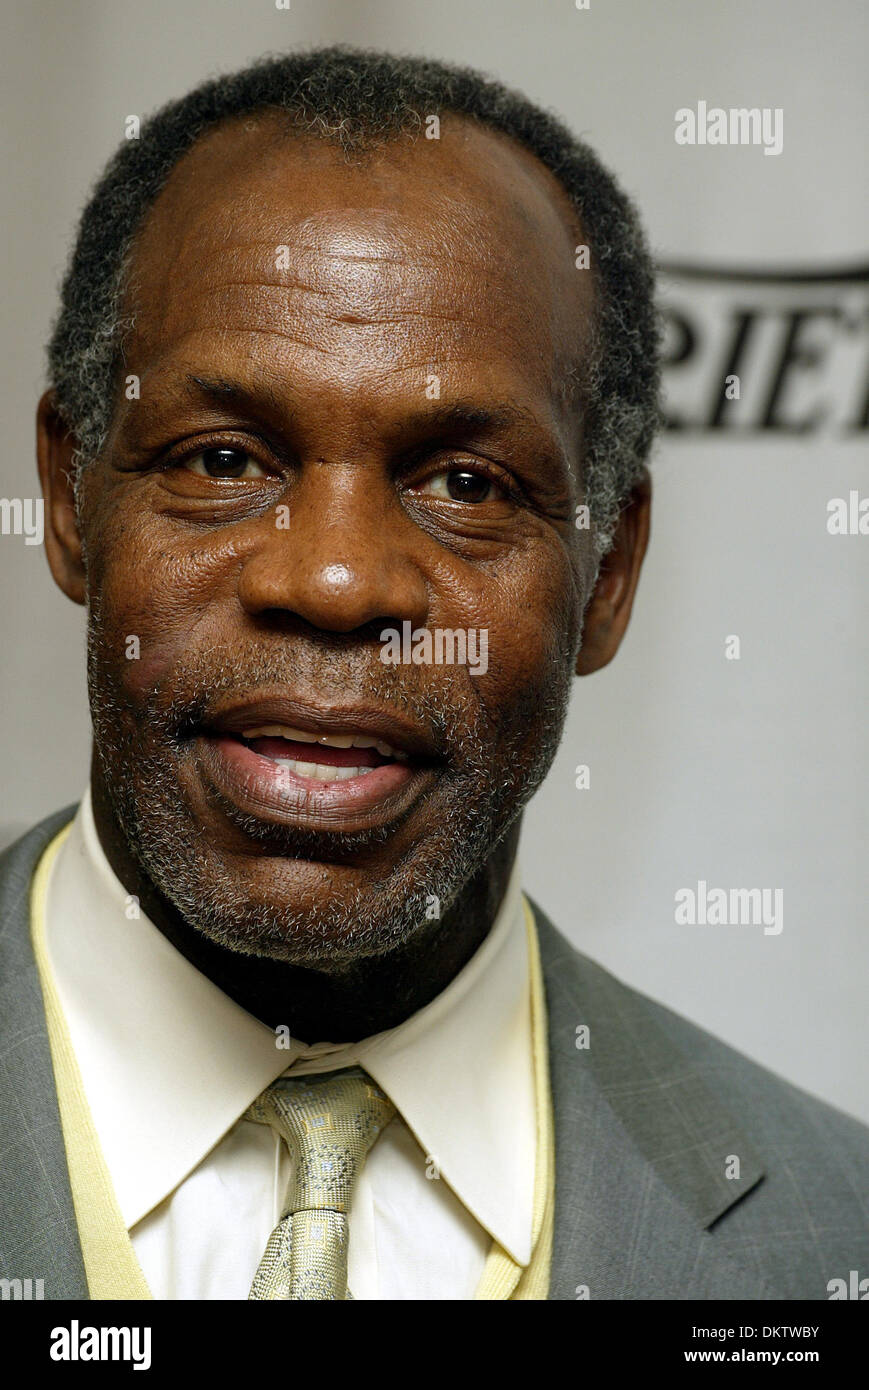 DANNY GLOVER.ACTOR. BEVERLY HILLS, USA.REGENT BEVERLY WILSHIRE HOTEL.28/10/2002.LAC10501. Stock Photo